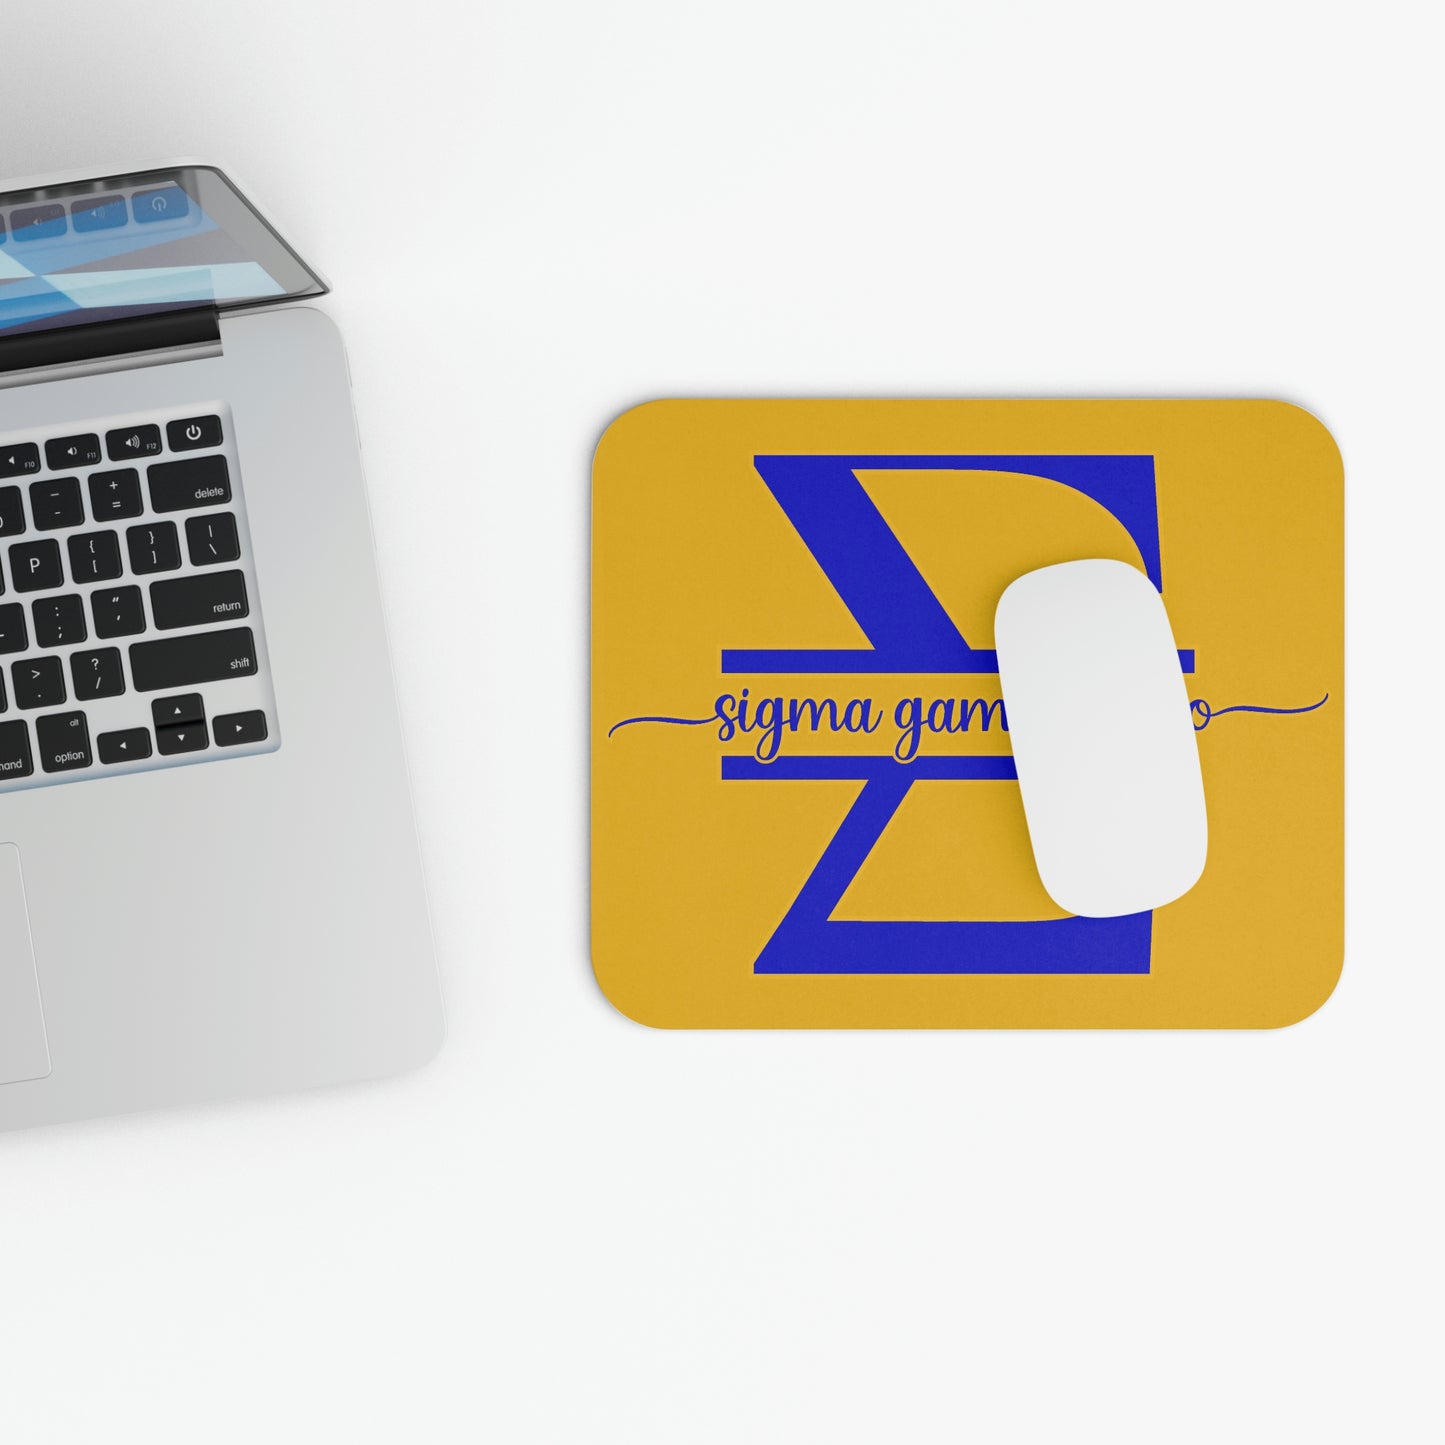 Sigma Gamma Rho Mouse Pad (3mm Thick)